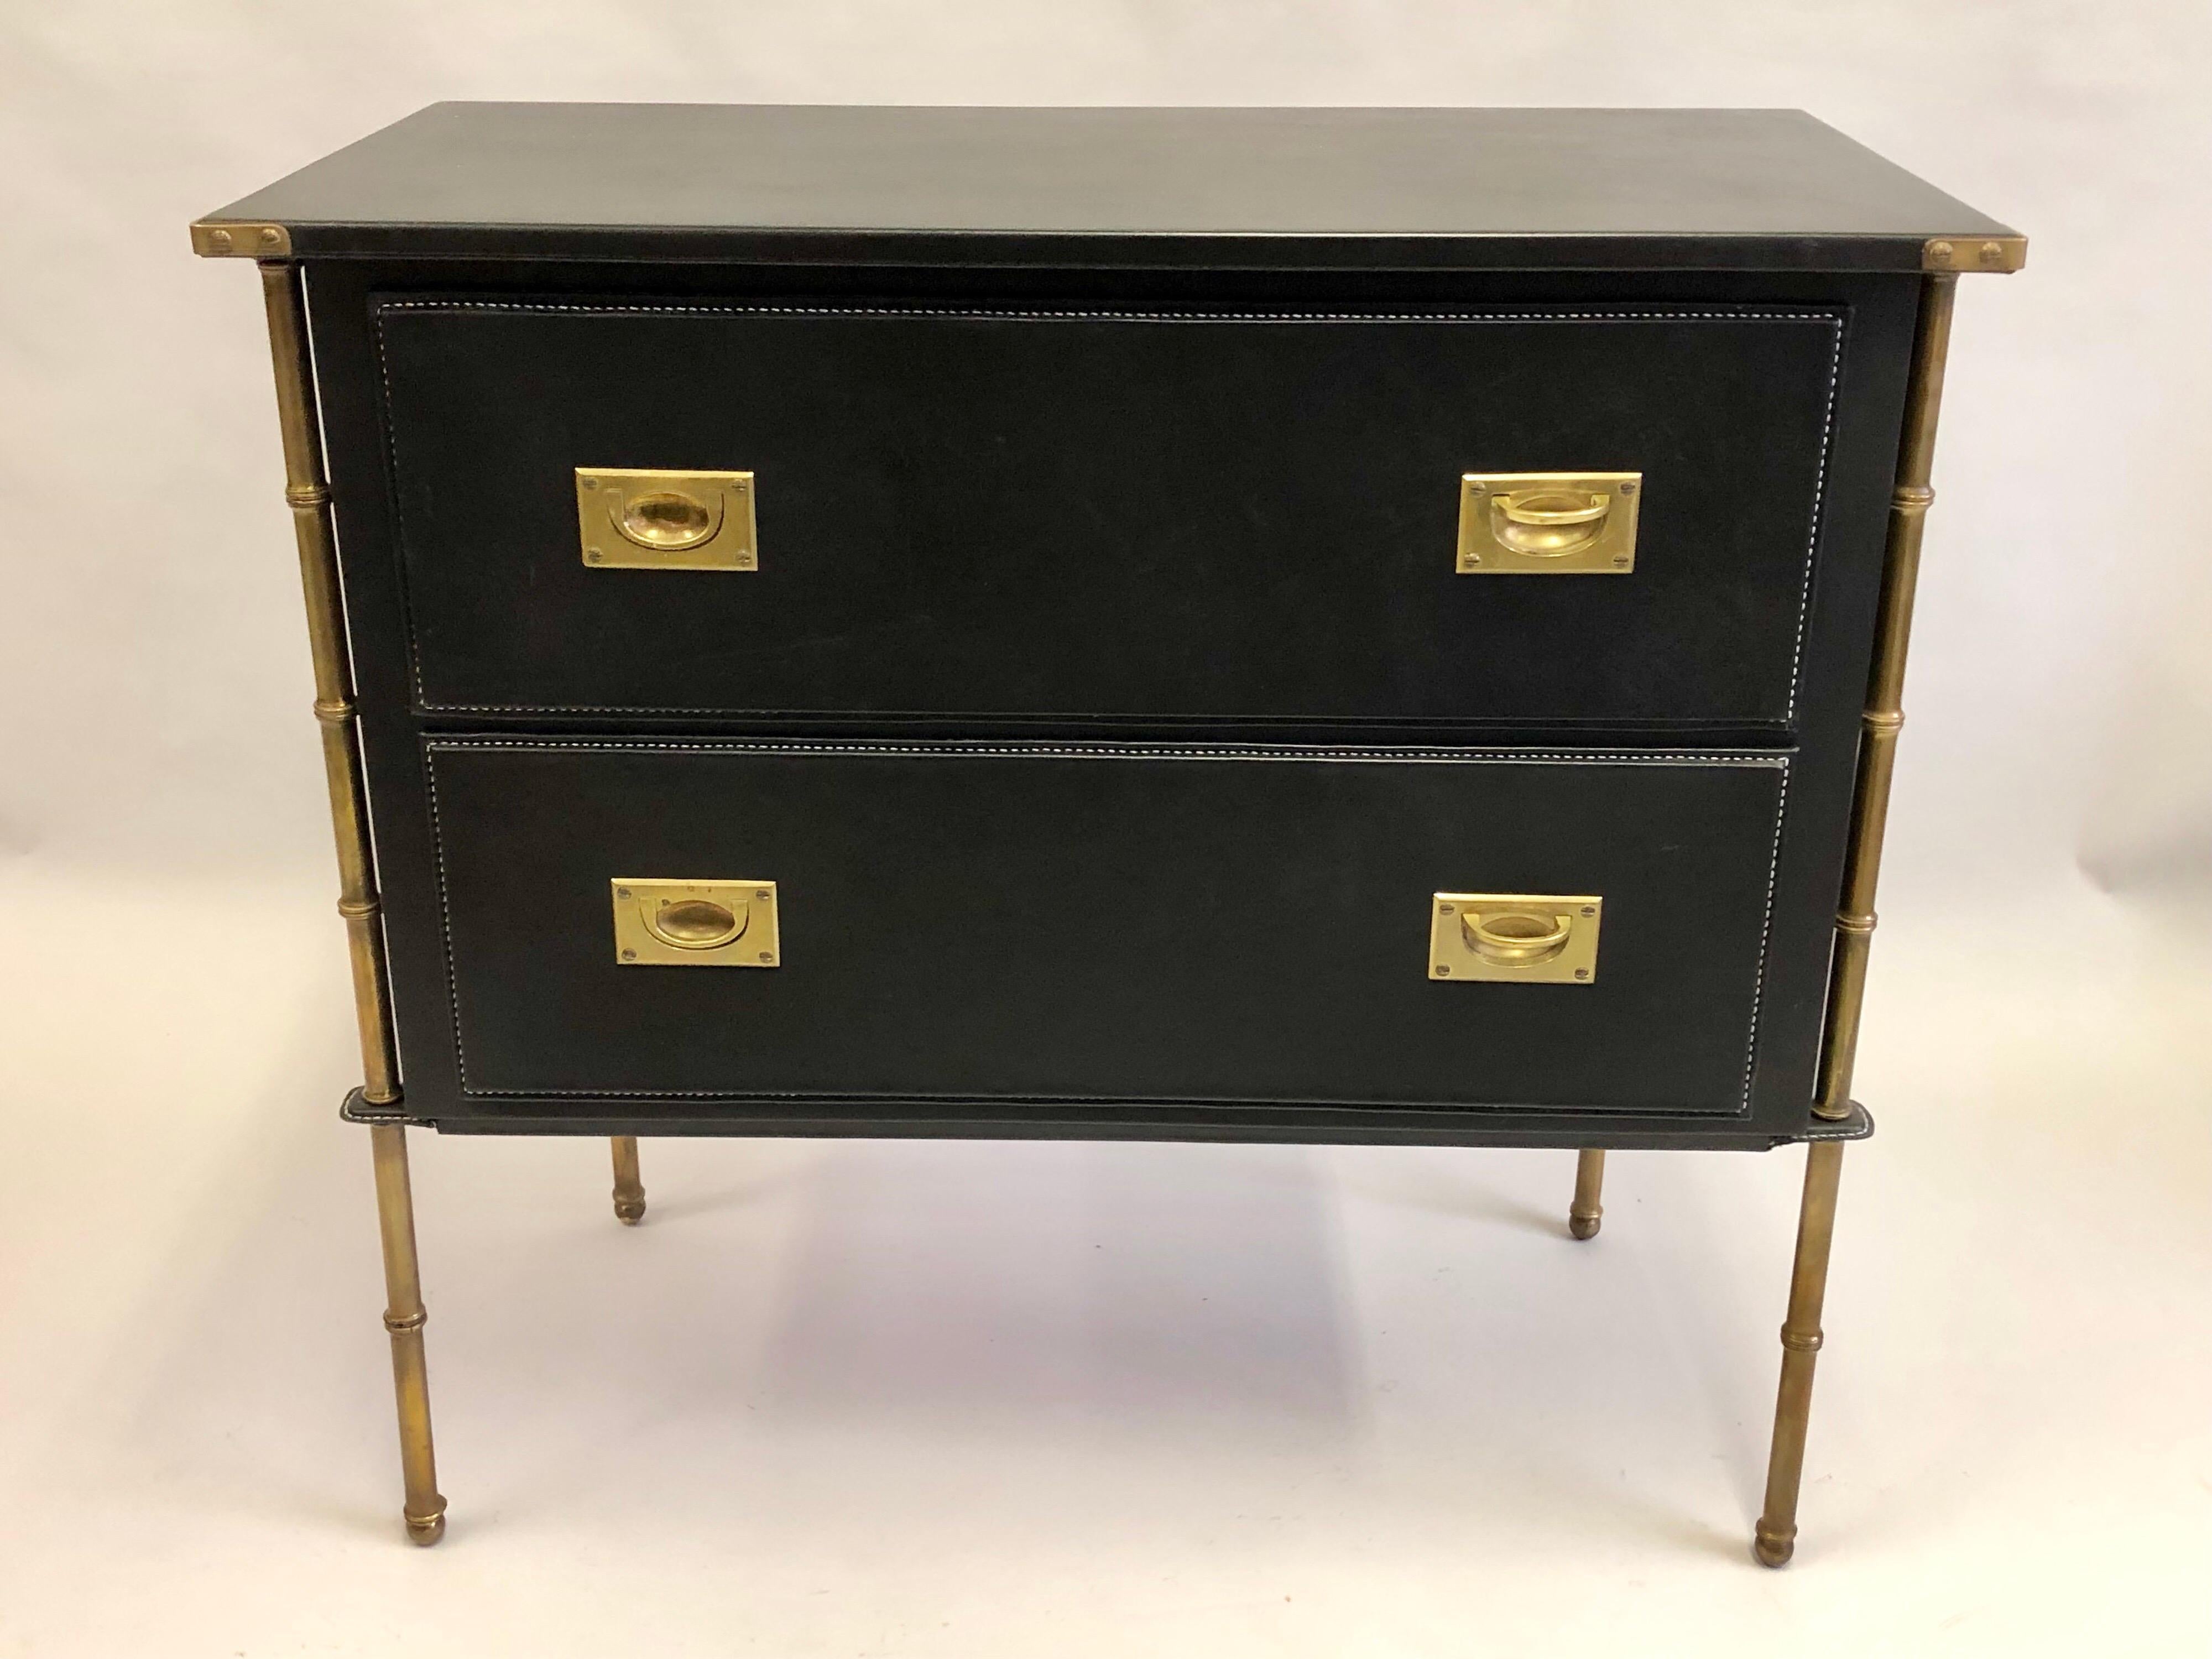 A Rare French Midcentury Modern hand stitched leather cabinet, dresser, commode, chest of drawers by Jacques Adnet, circa 1955. The entire composition is subtly balanced with muted black leather and burnished brass coloration. The piece features